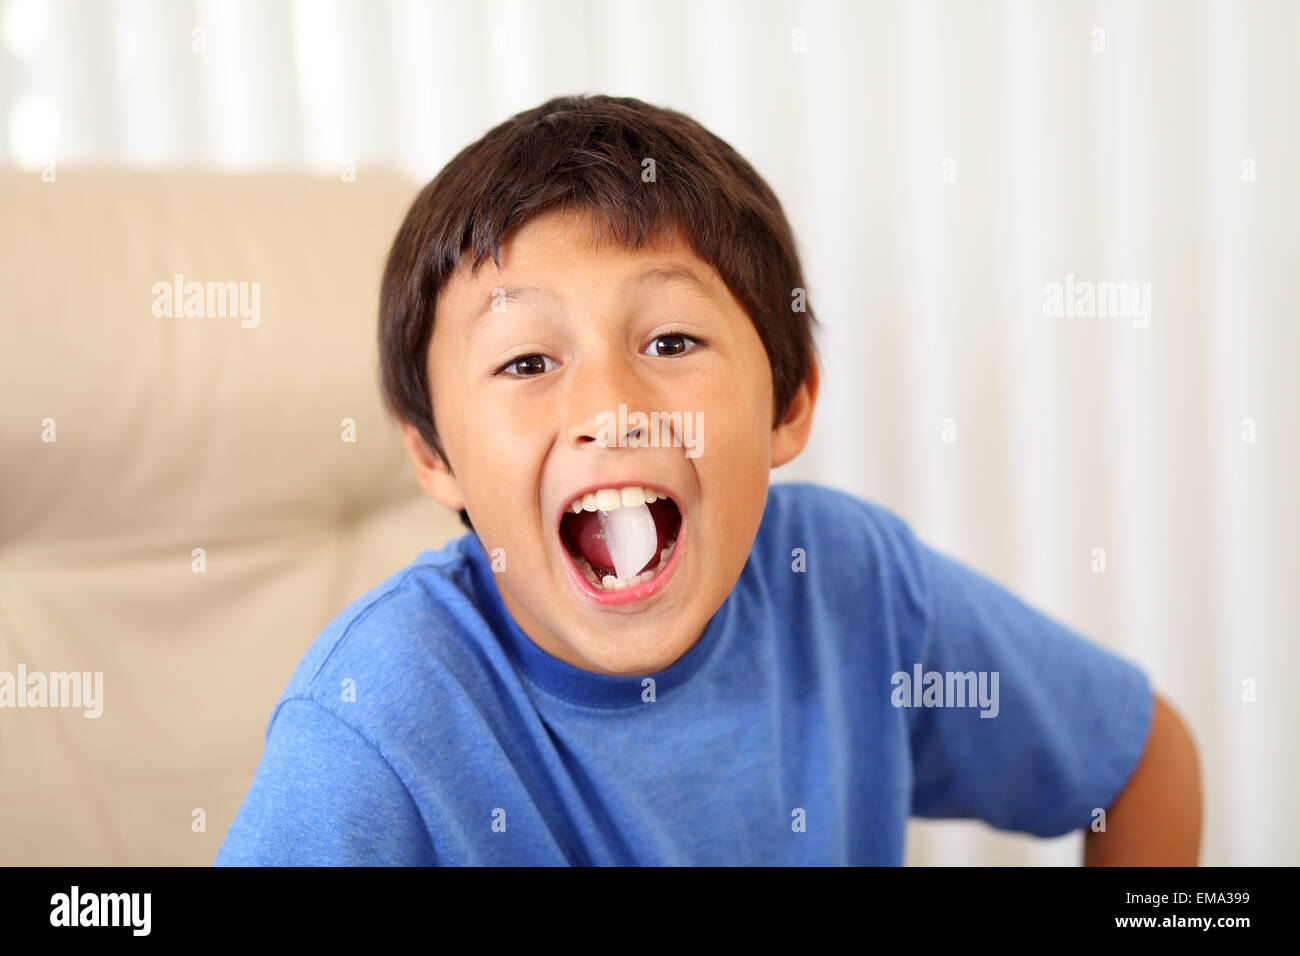 Young boy eating ice cube Banque D'Images